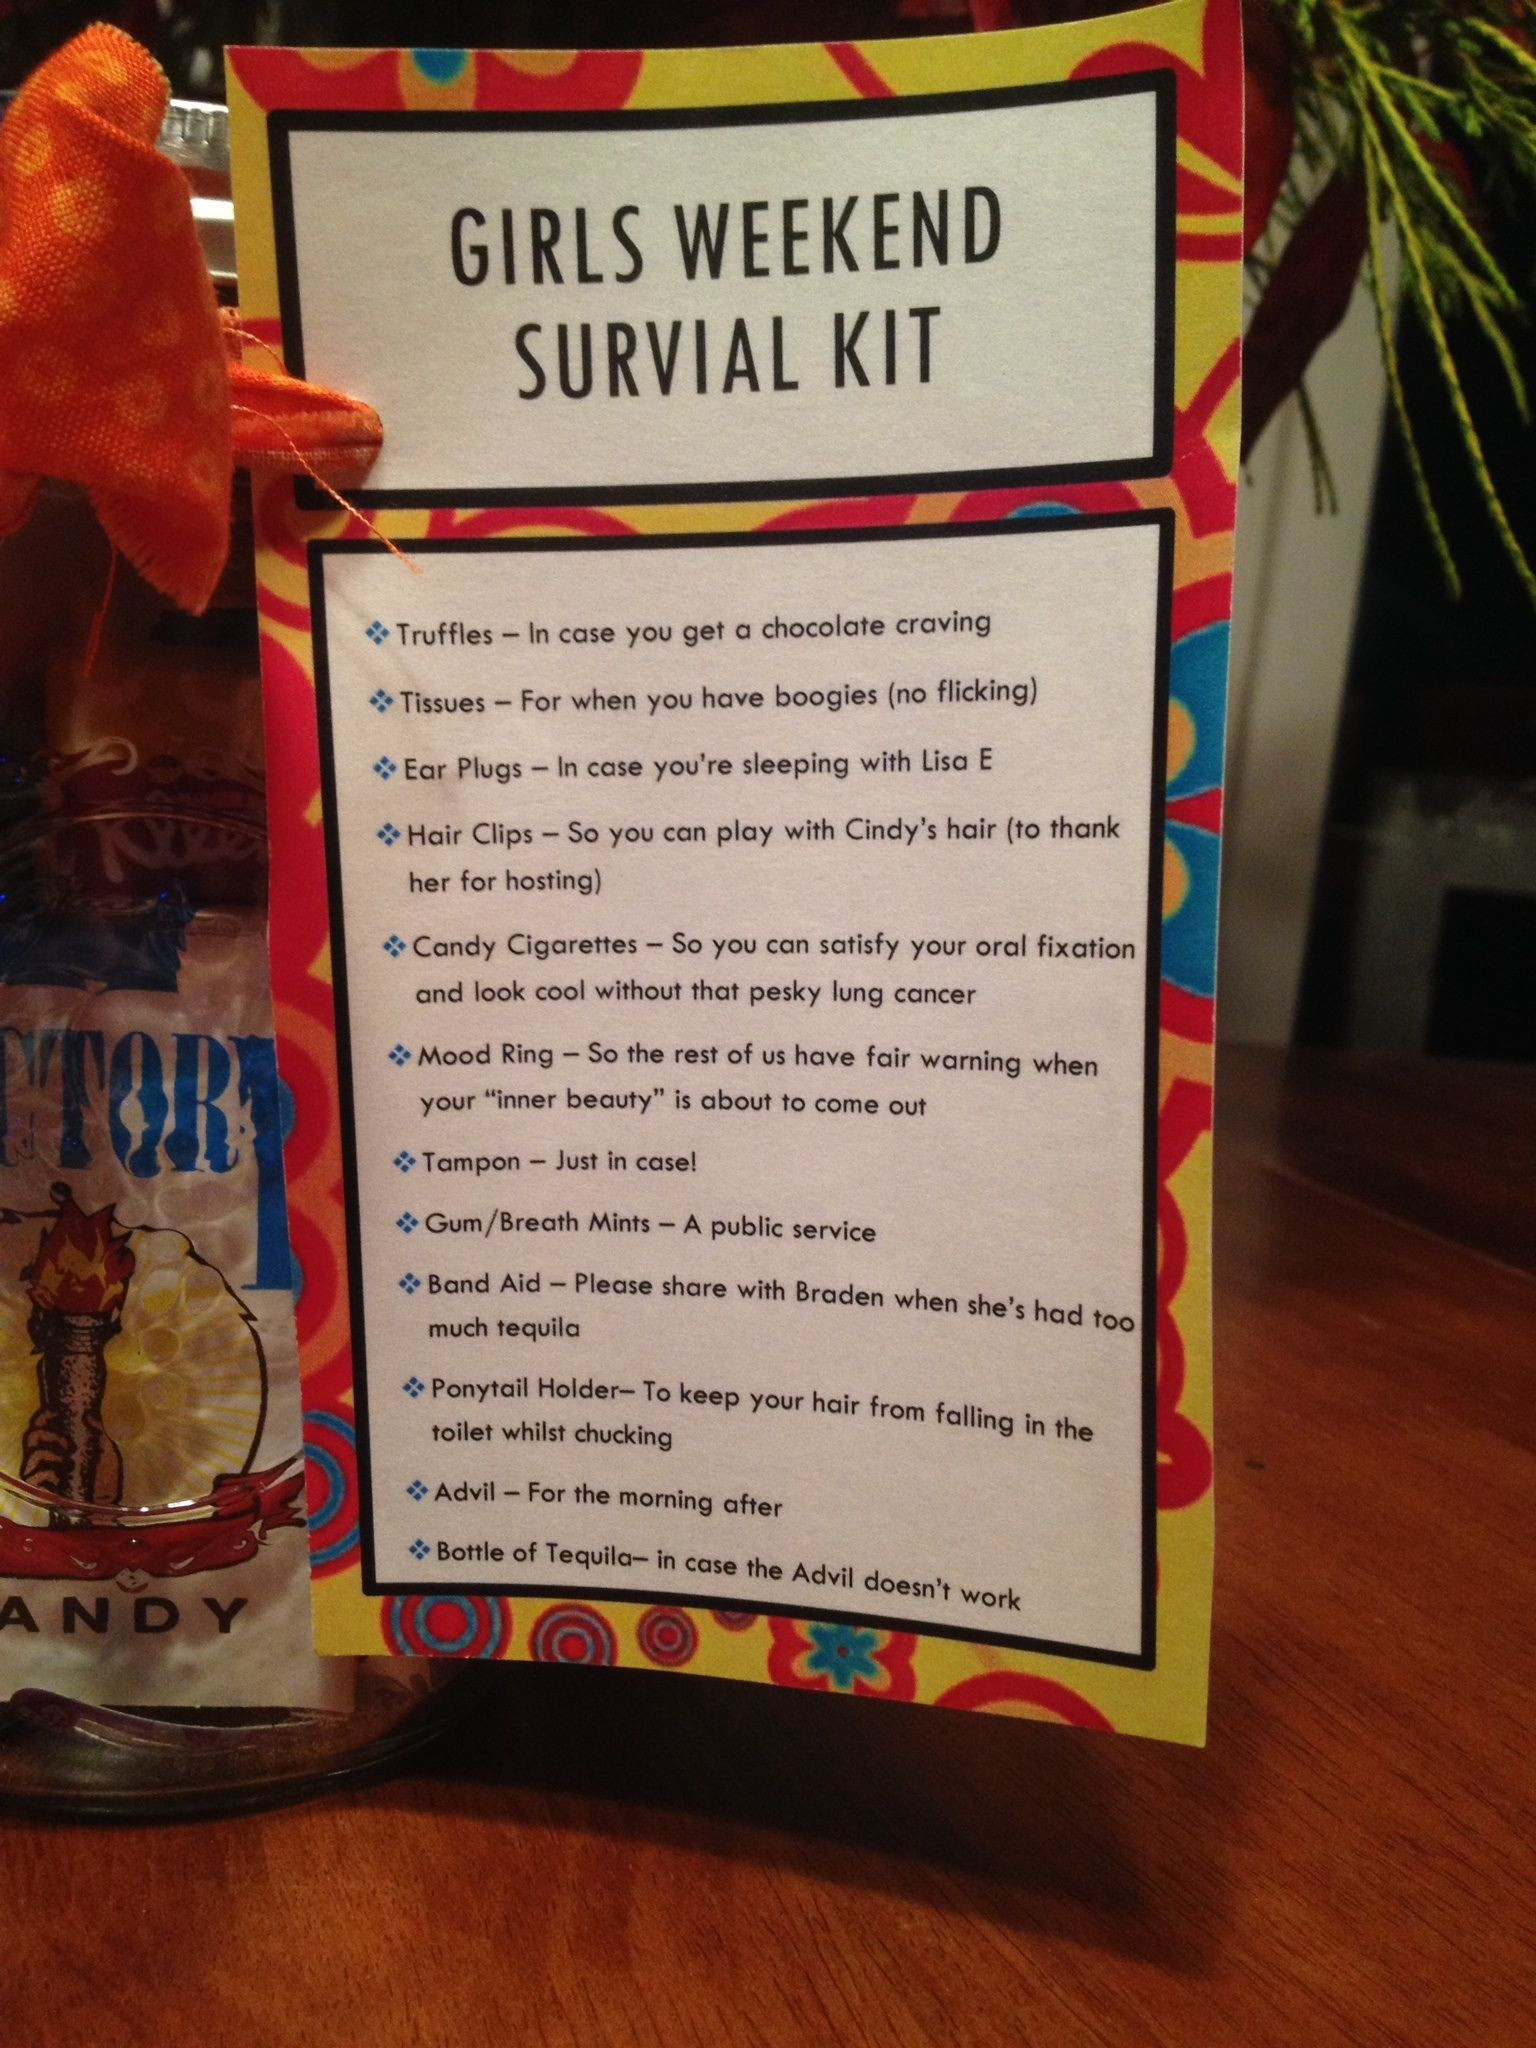 Girls Trip Gift Ideas
 Gils Weekend Survival Kit Close up of the card with a list